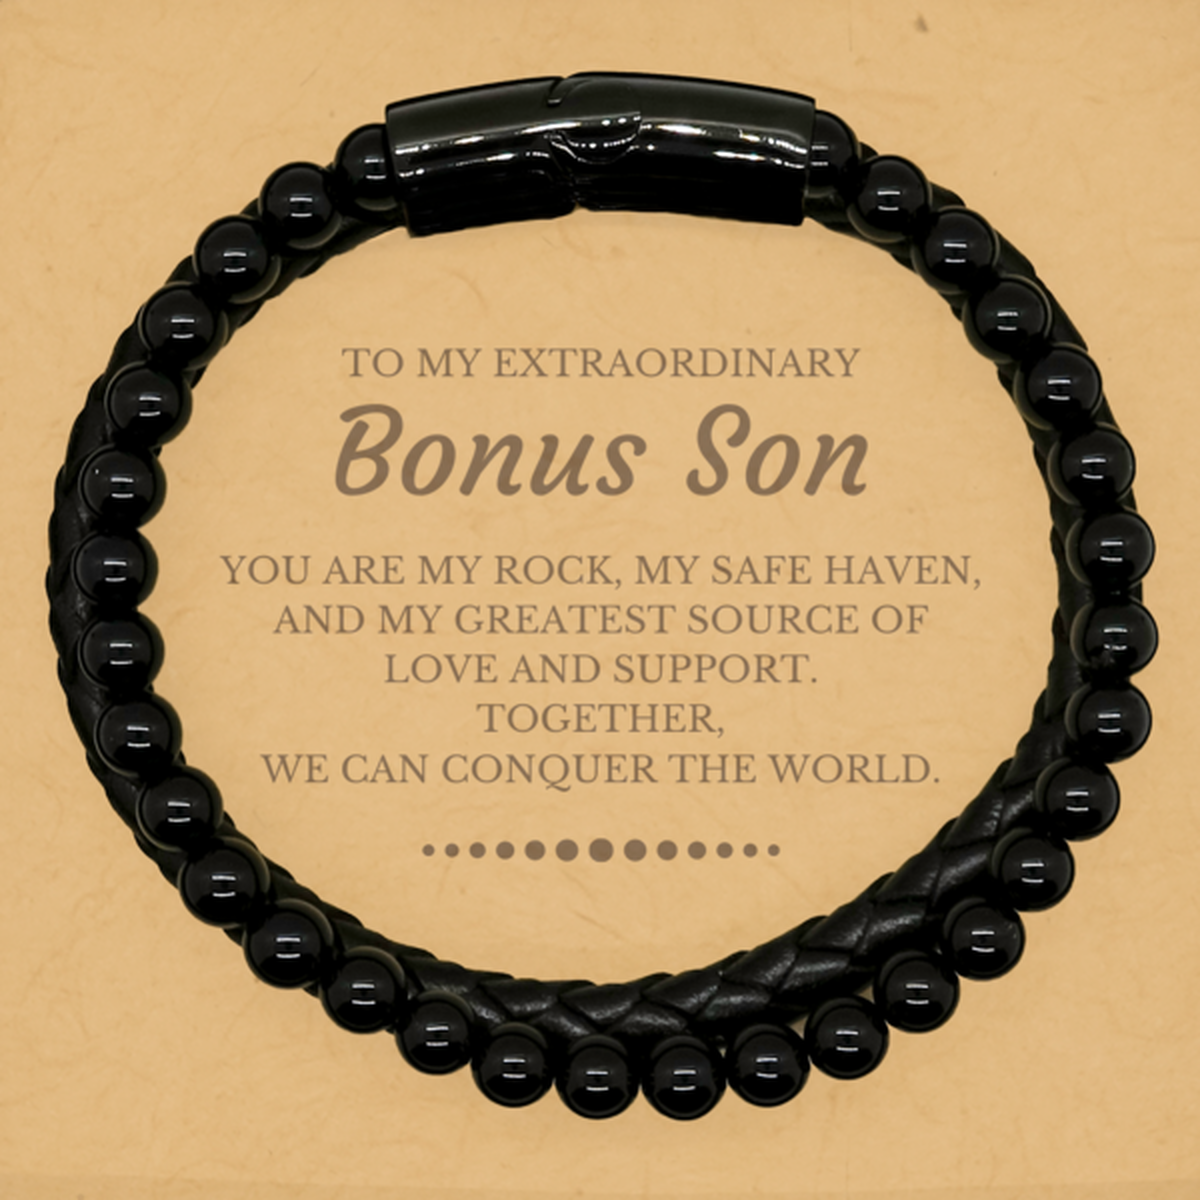 To My Extraordinary Bonus Son Gifts, Together, we can conquer the world, Birthday Stone Leather Bracelets For Bonus Son, Christmas Gifts For Bonus Son